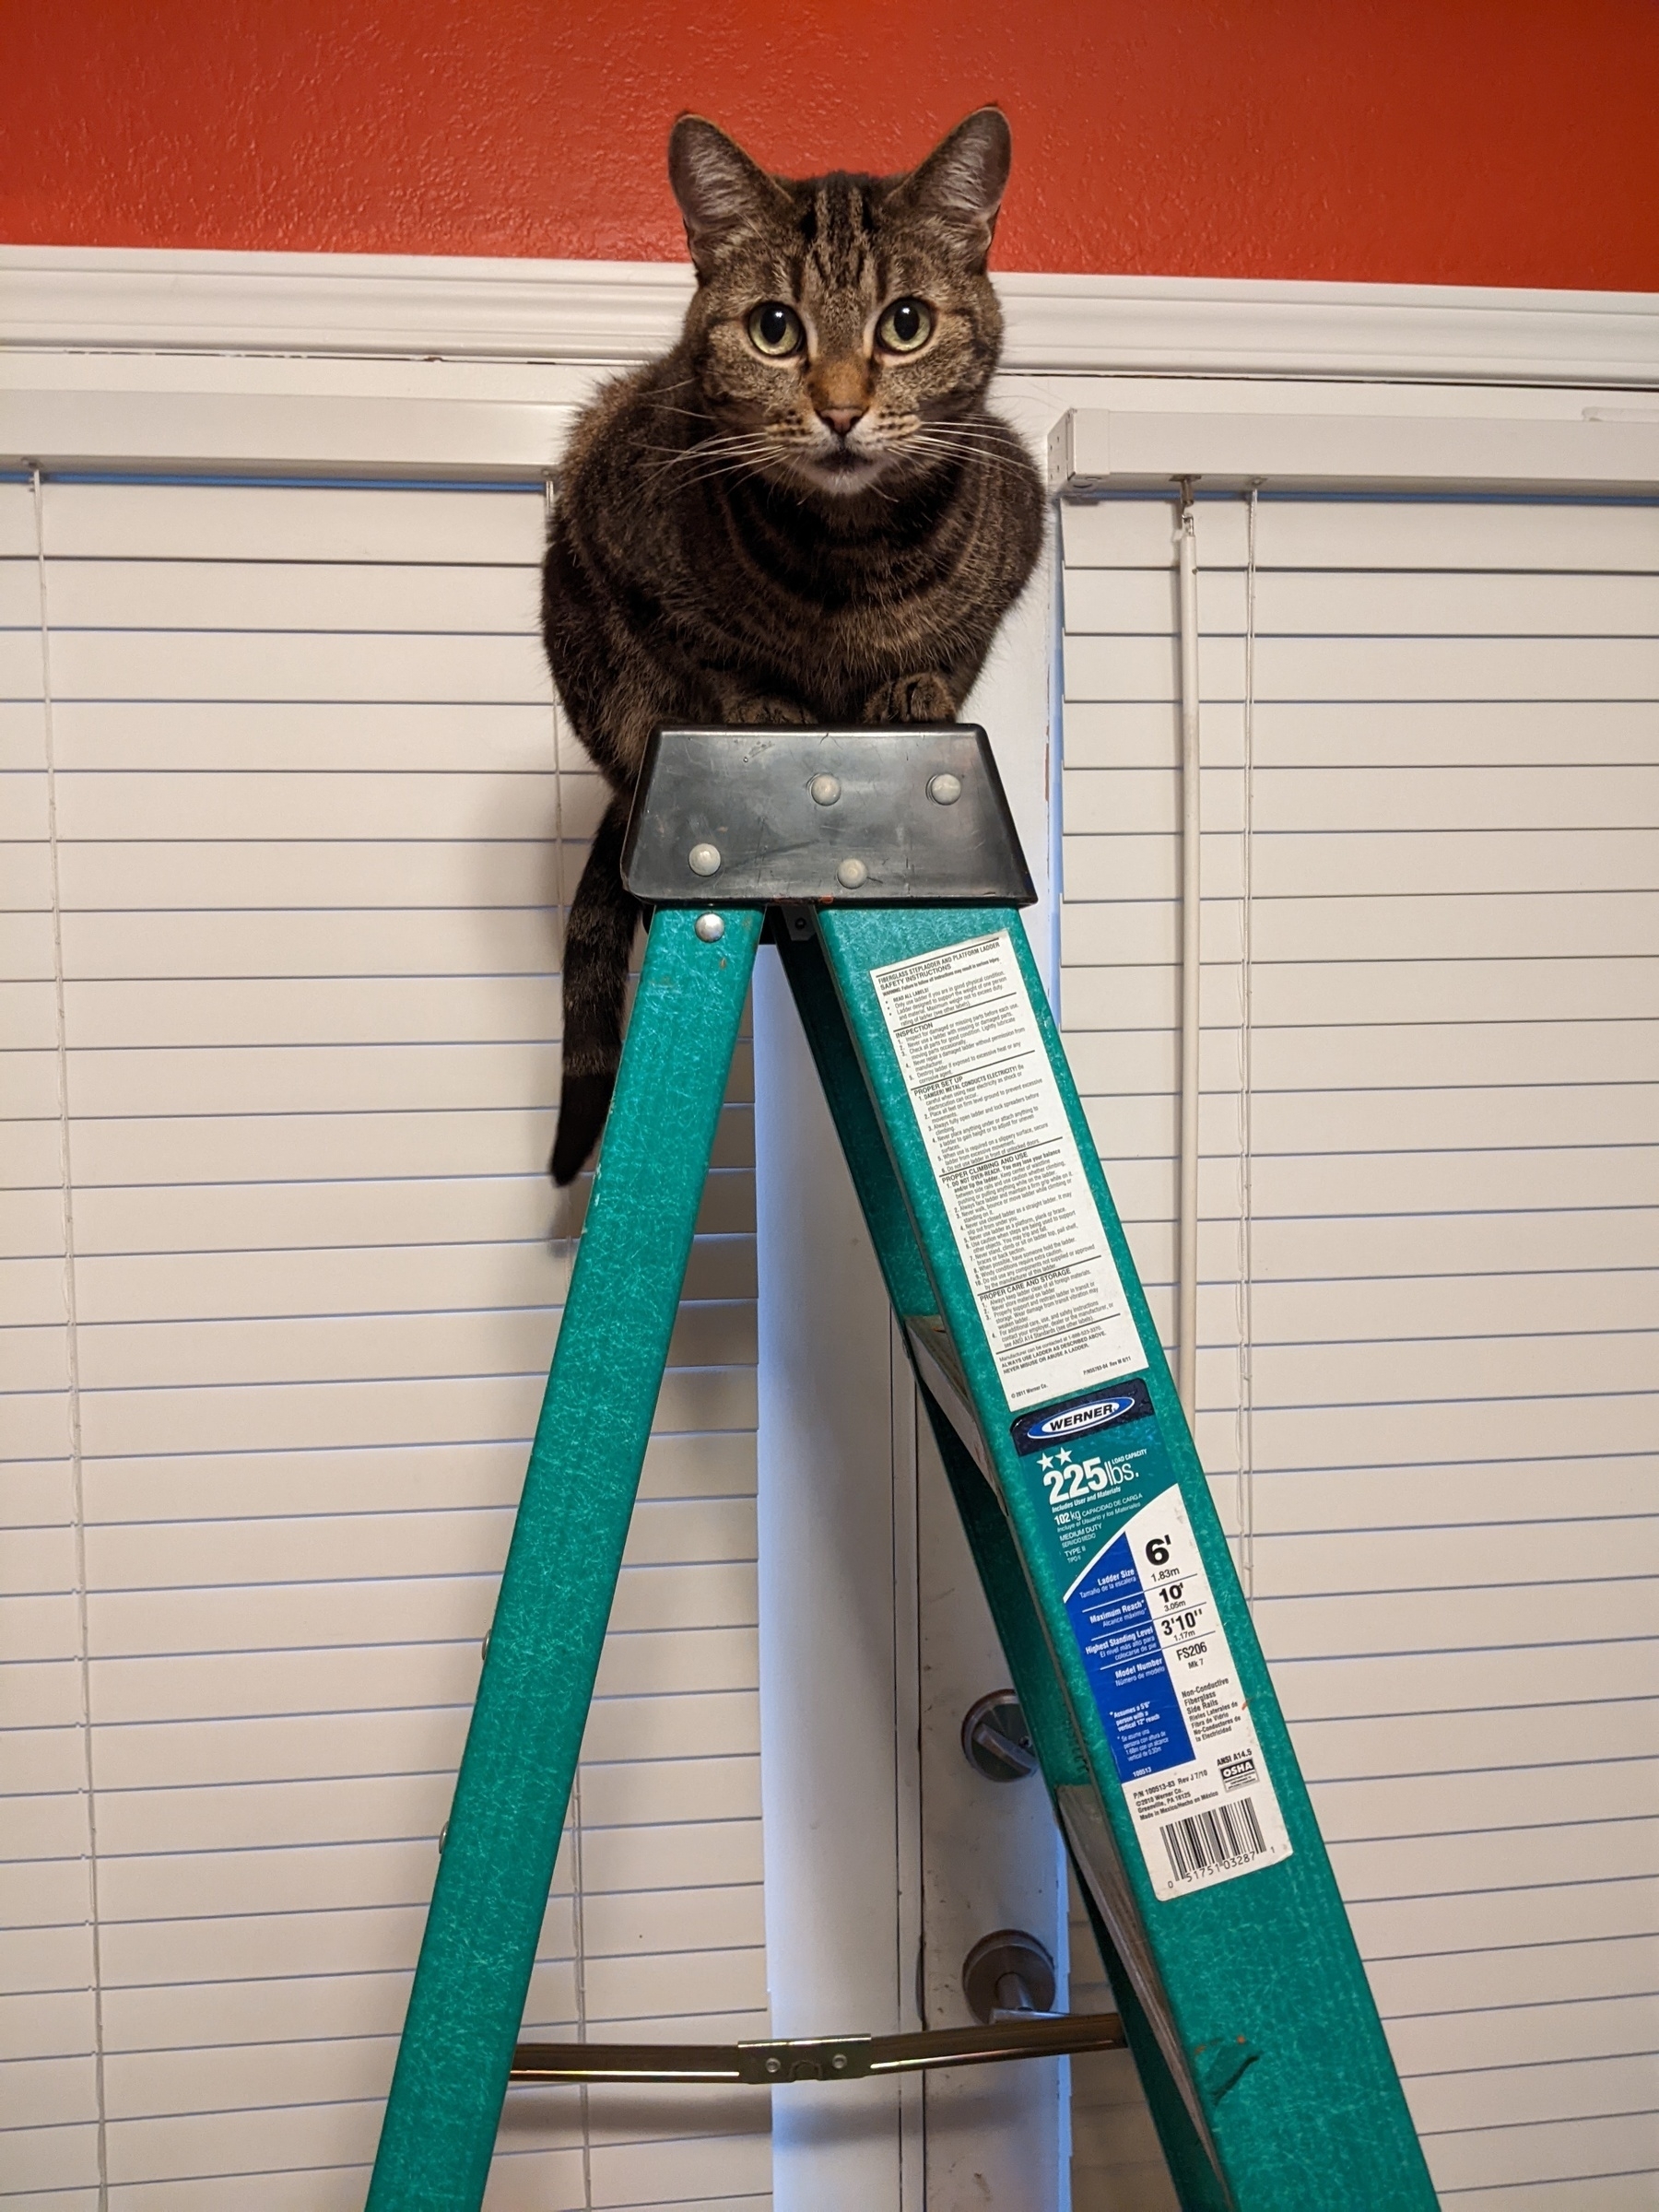 Brown tabby perches atop a green ladder in front of an orange wall with French doors, looking straight into the camera